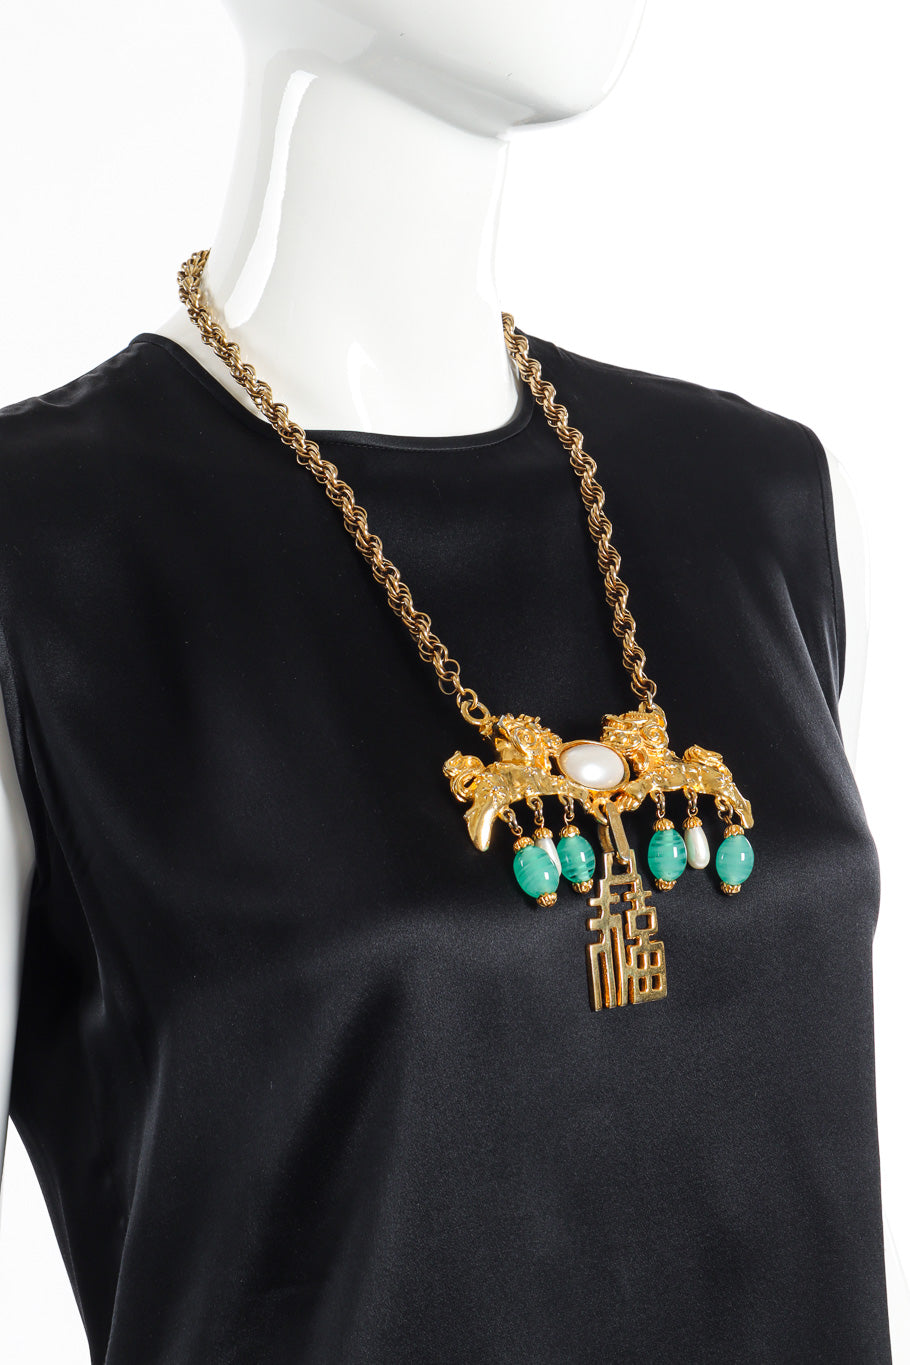 Foo Dog Palace Necklace by Donald Stannard on mannequin in black silk blouse @recessla